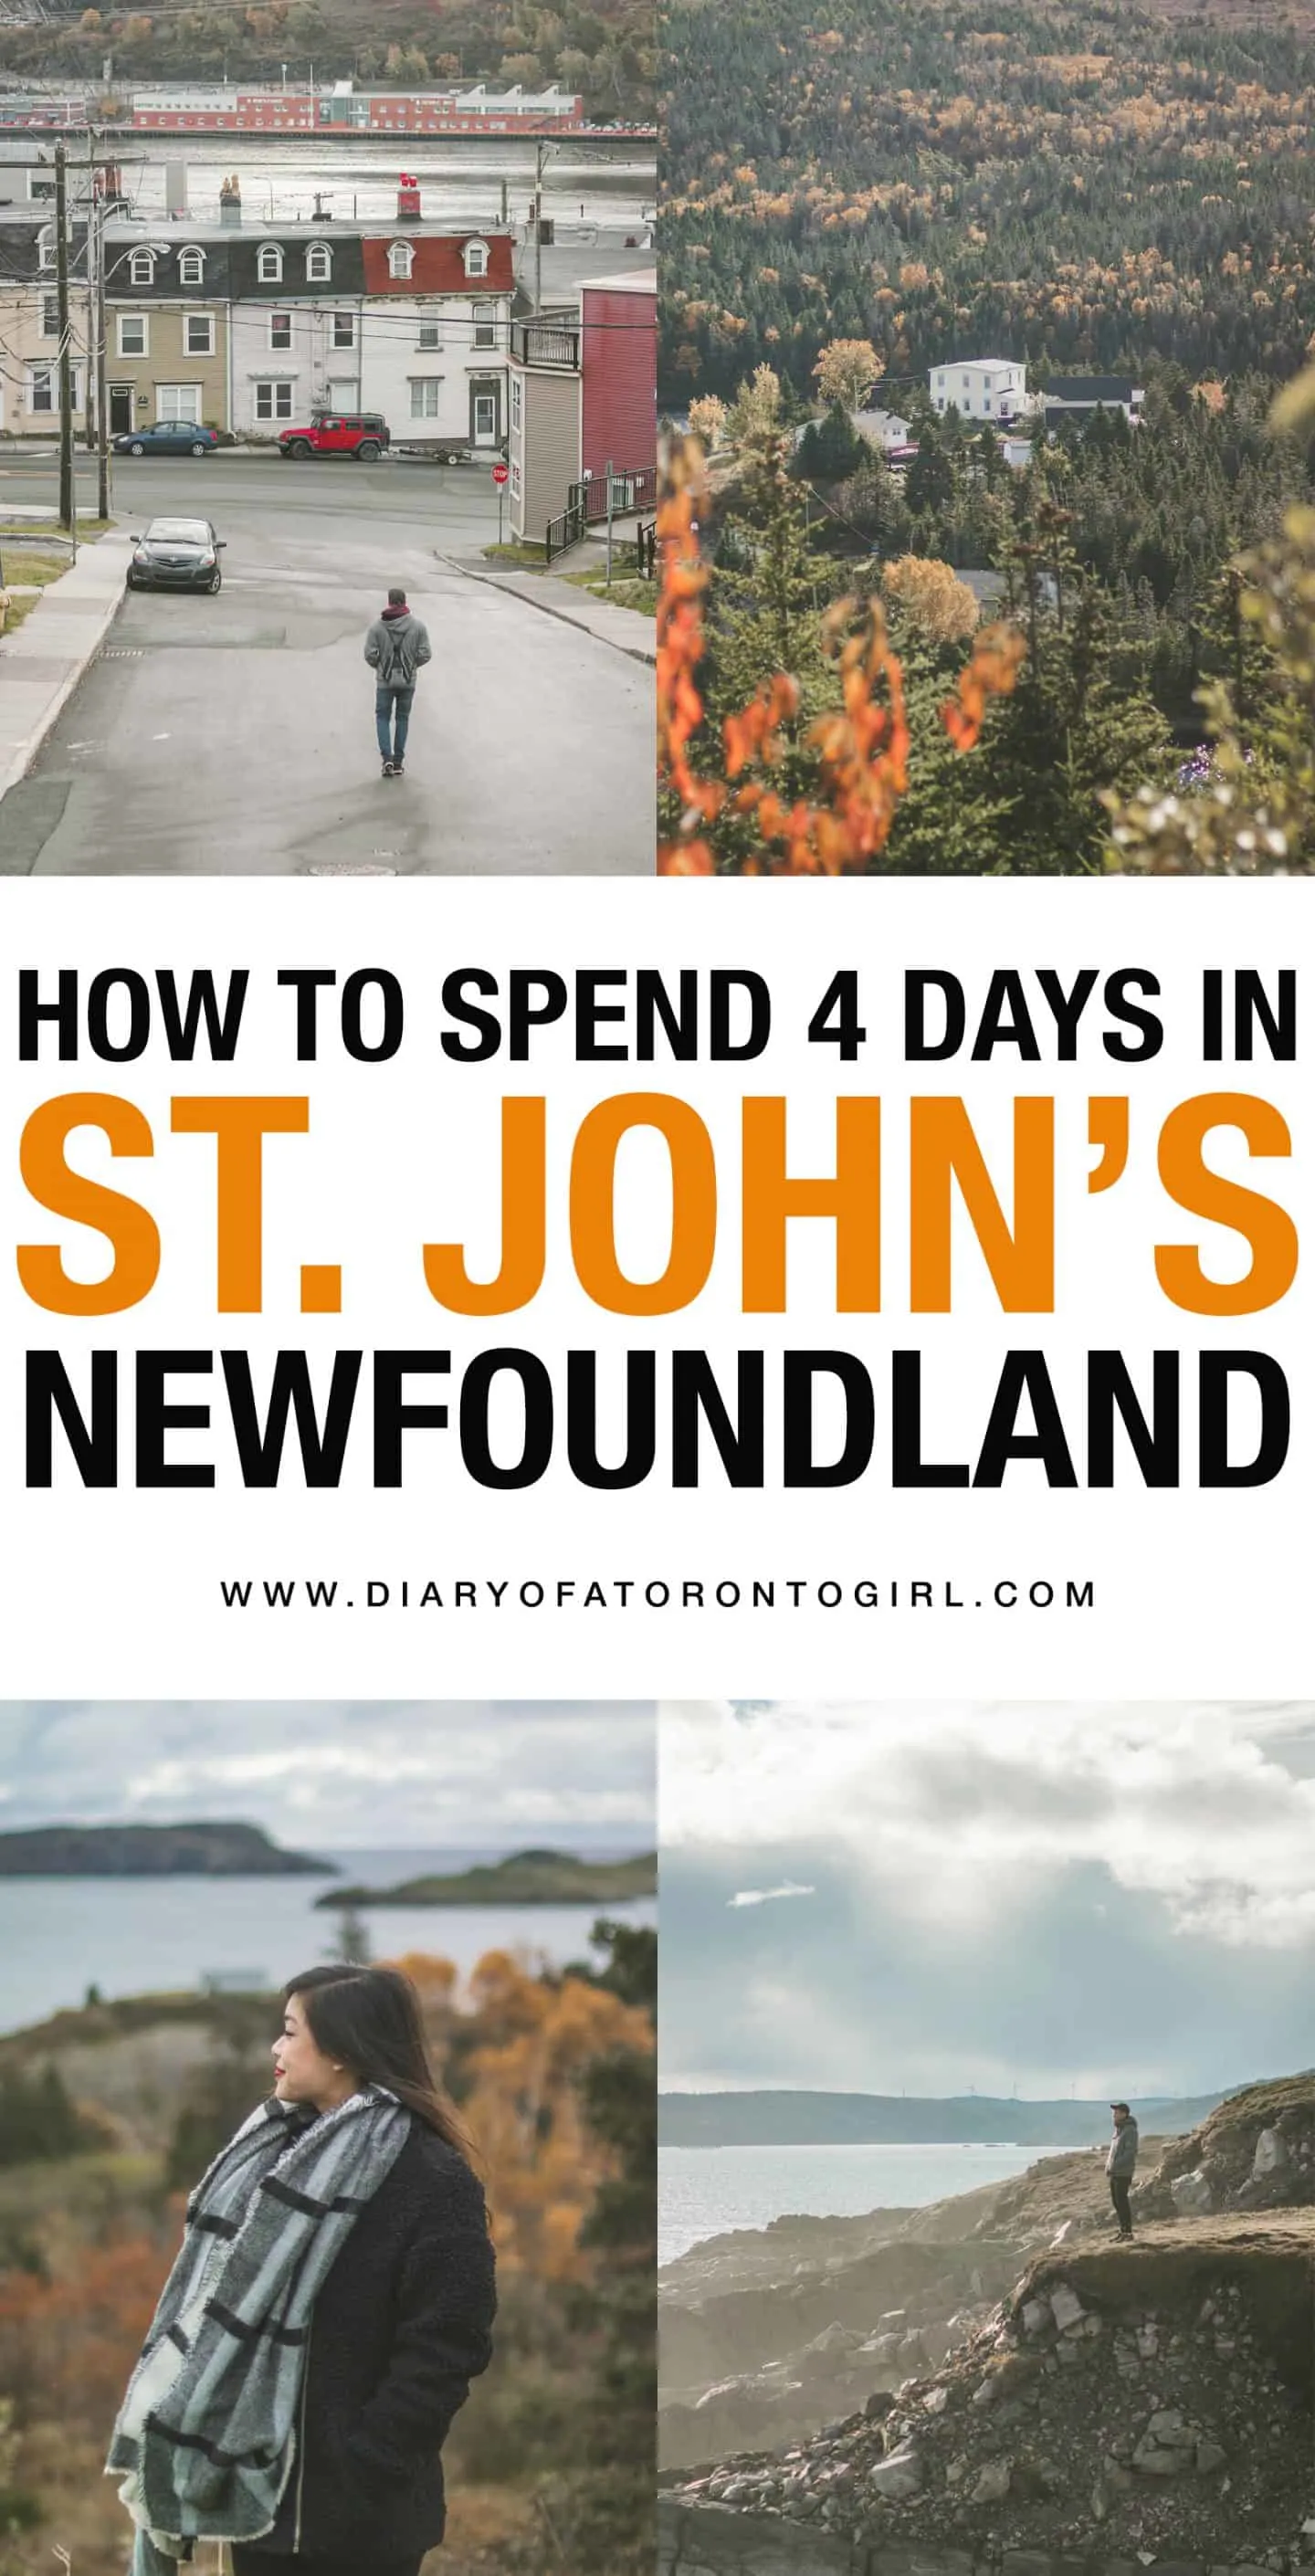 Your ultimate guide on how to spend 4 perfect days in Newfoundland during the fall, including all the best and most fun things to do in St. John's!